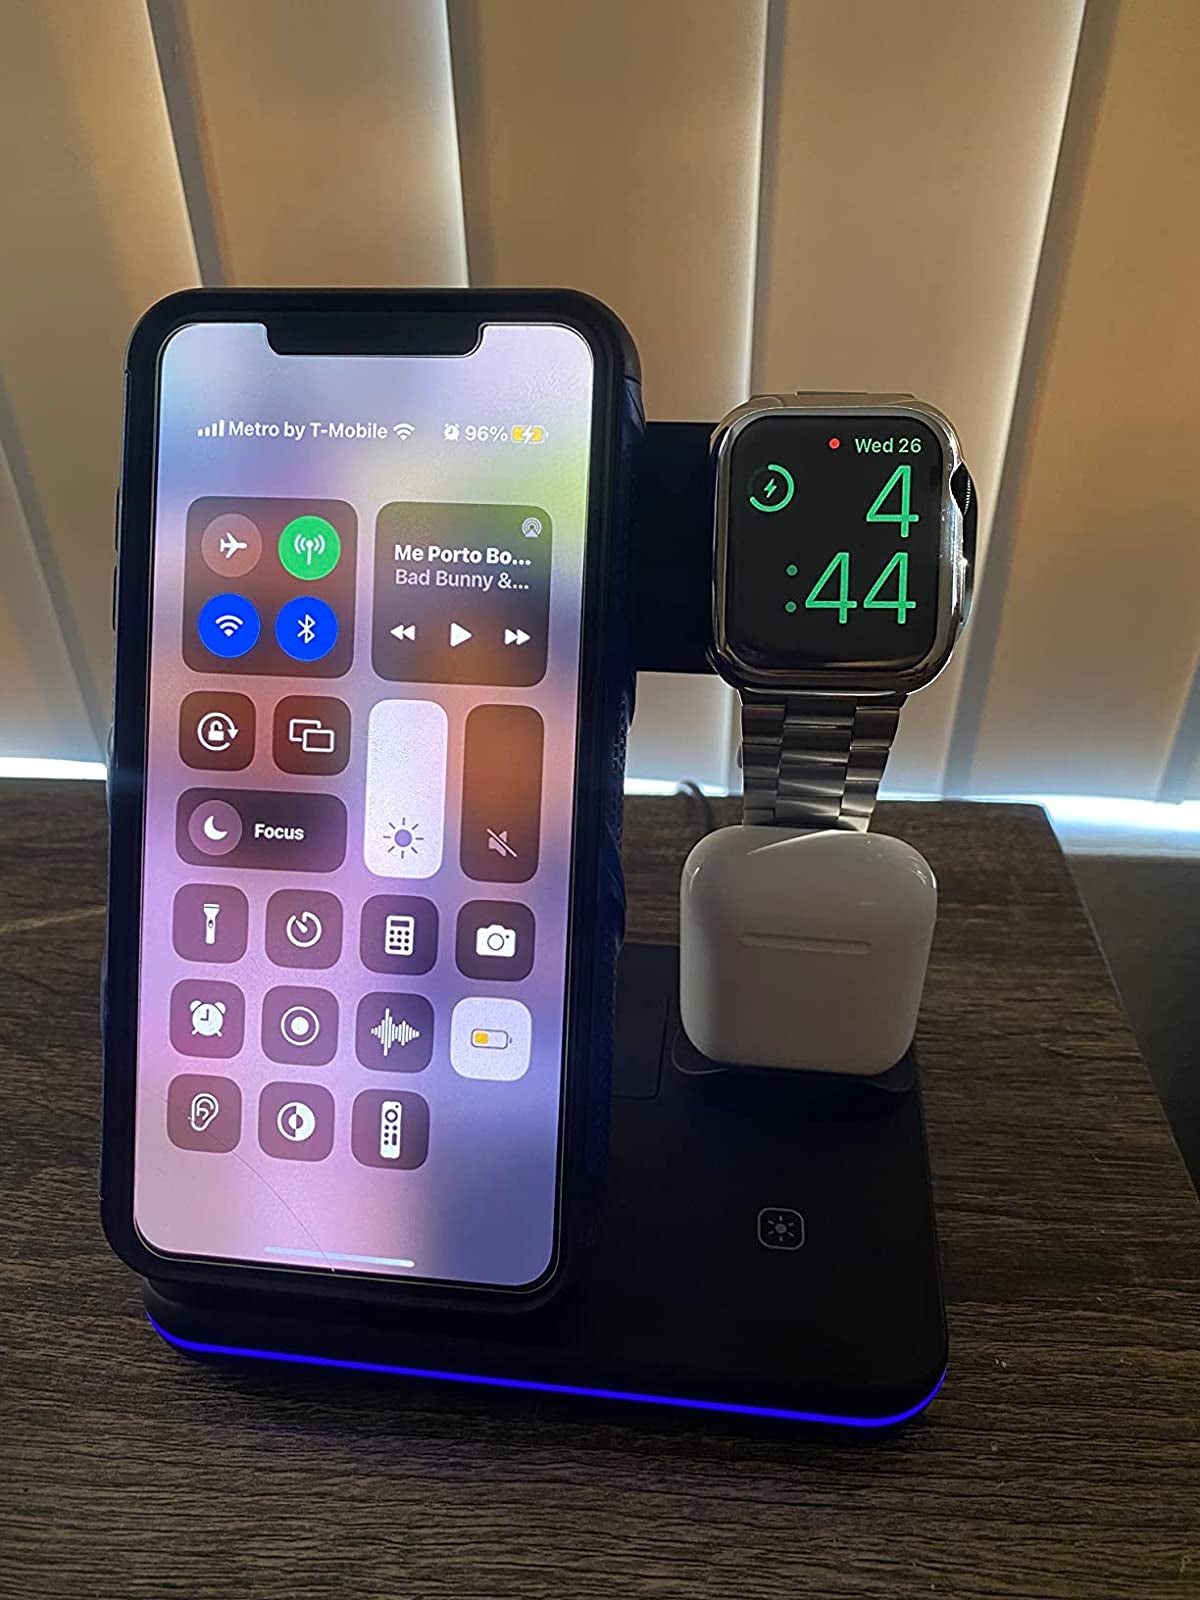 Stand on reviewer's night table with phone, watch and AirPods plugged in and no visible cords